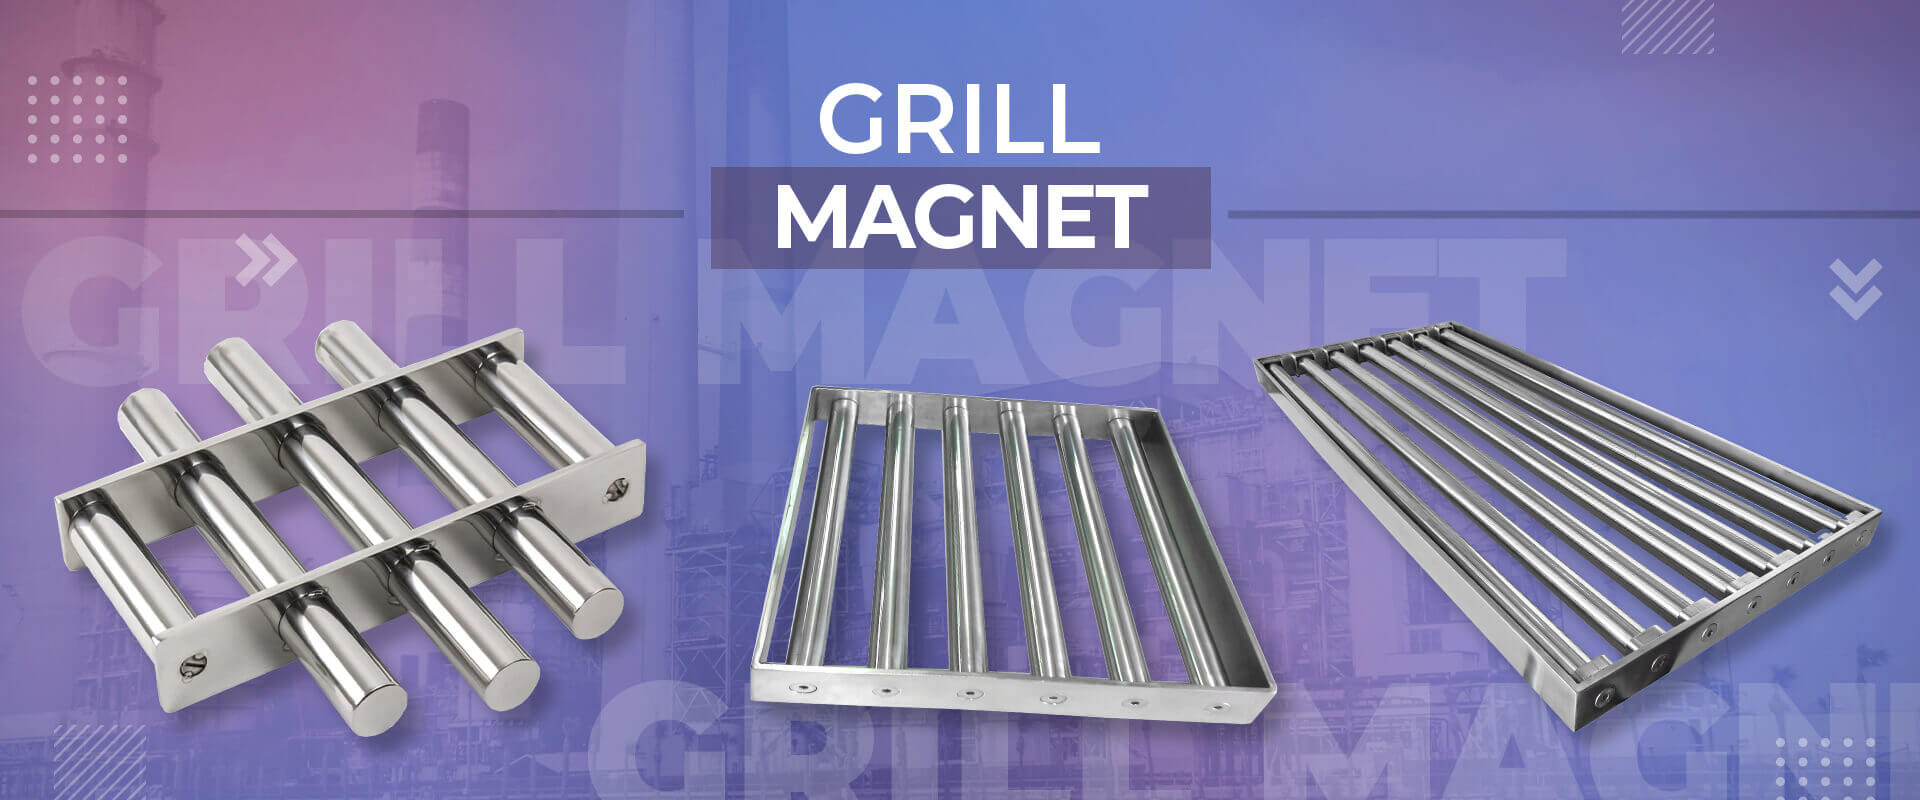 Grill Magnet